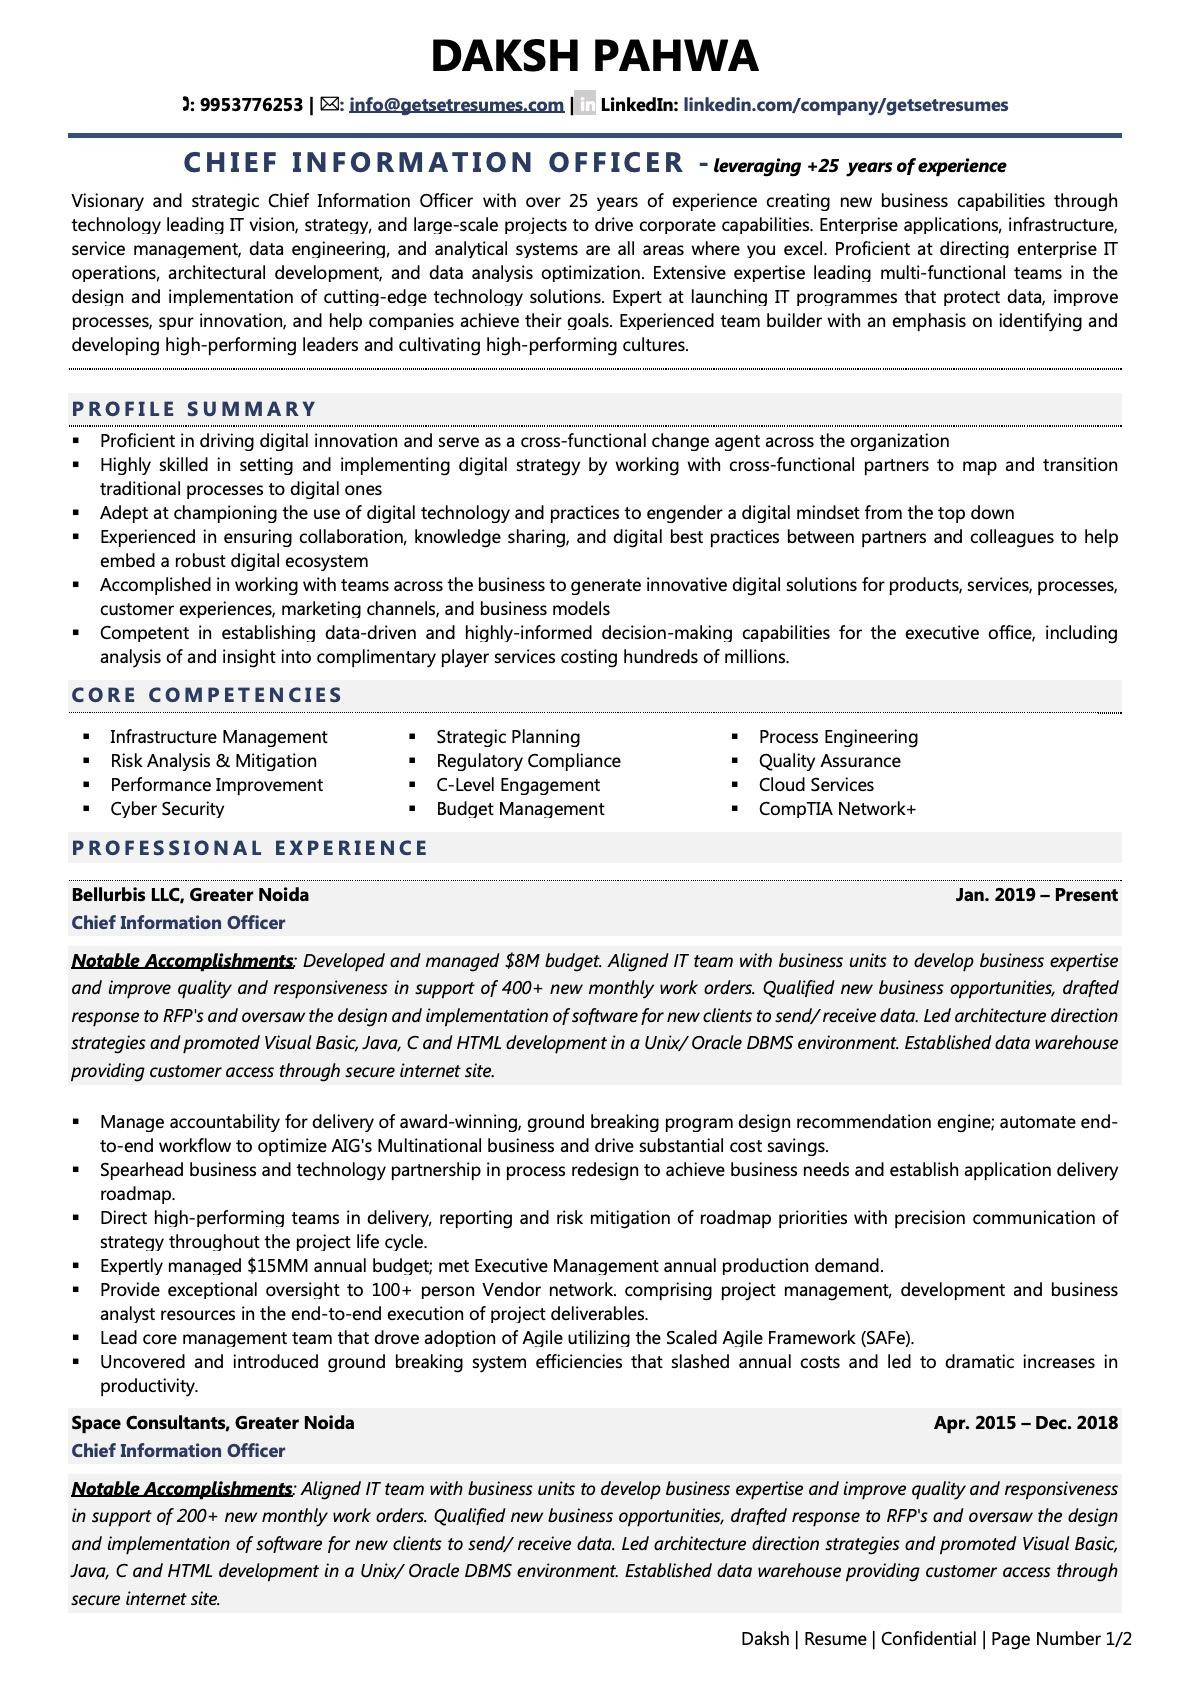 Sample Resume with Comp Tia Scredentials Cio Resume Examples & Template (with Job Winning Tips)